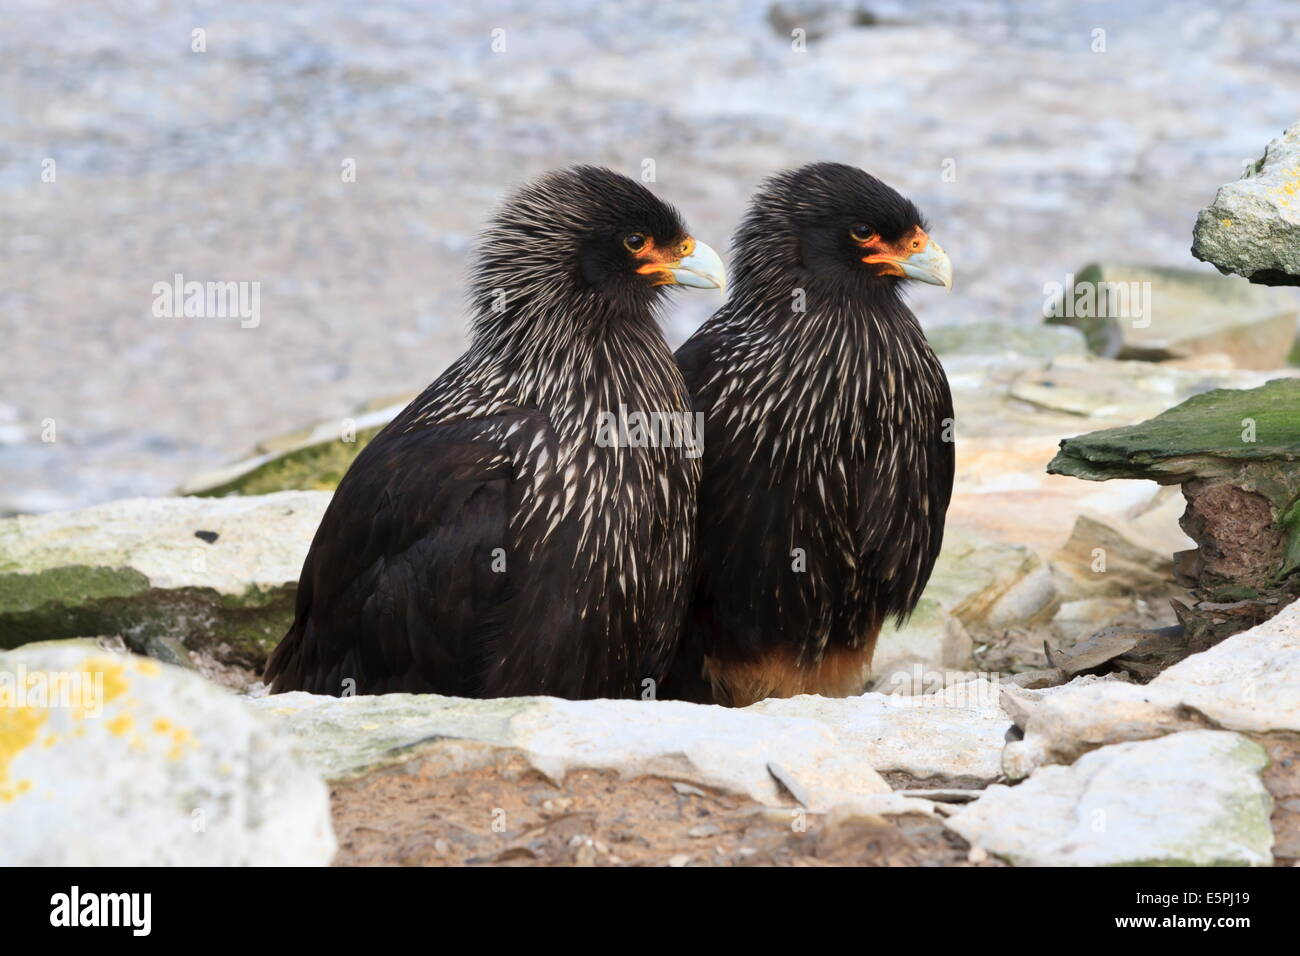 Pair of Striated caracaras behind a rock at Rockhopper Point, Sea Lion Island, Falkland Islands, South Atlantic Stock Photo